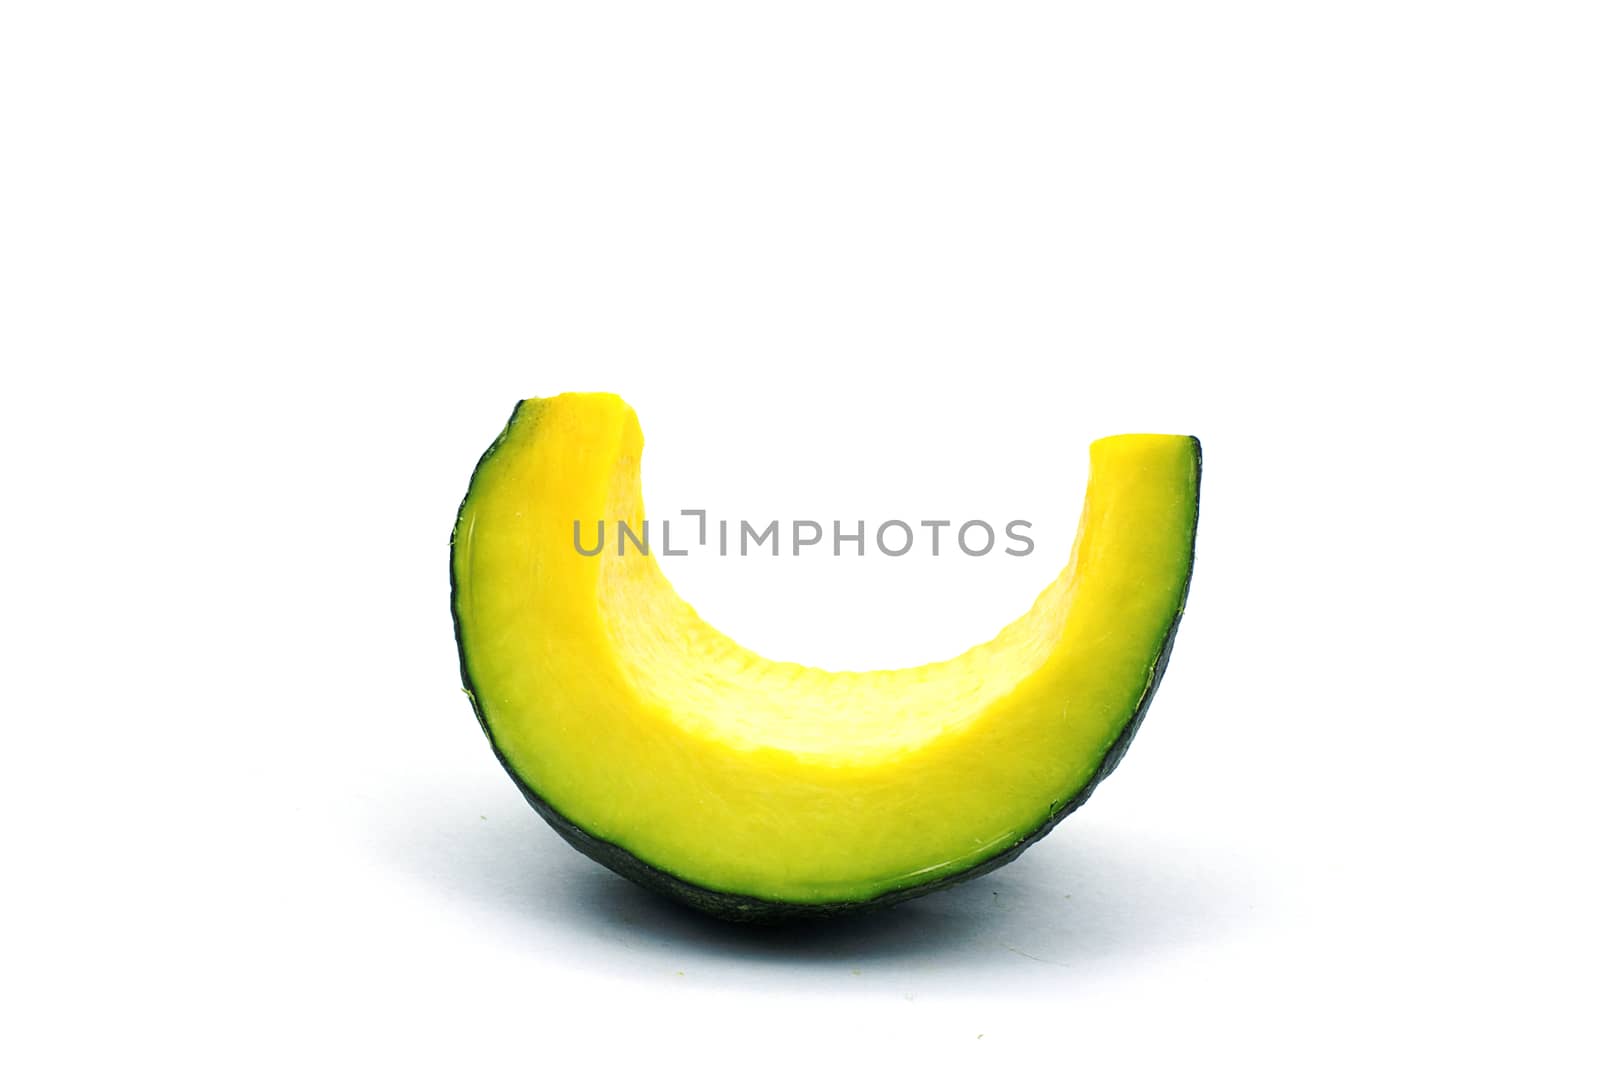 A piece of pumpkin on white background. A sliced seedless pumpkin on white background.